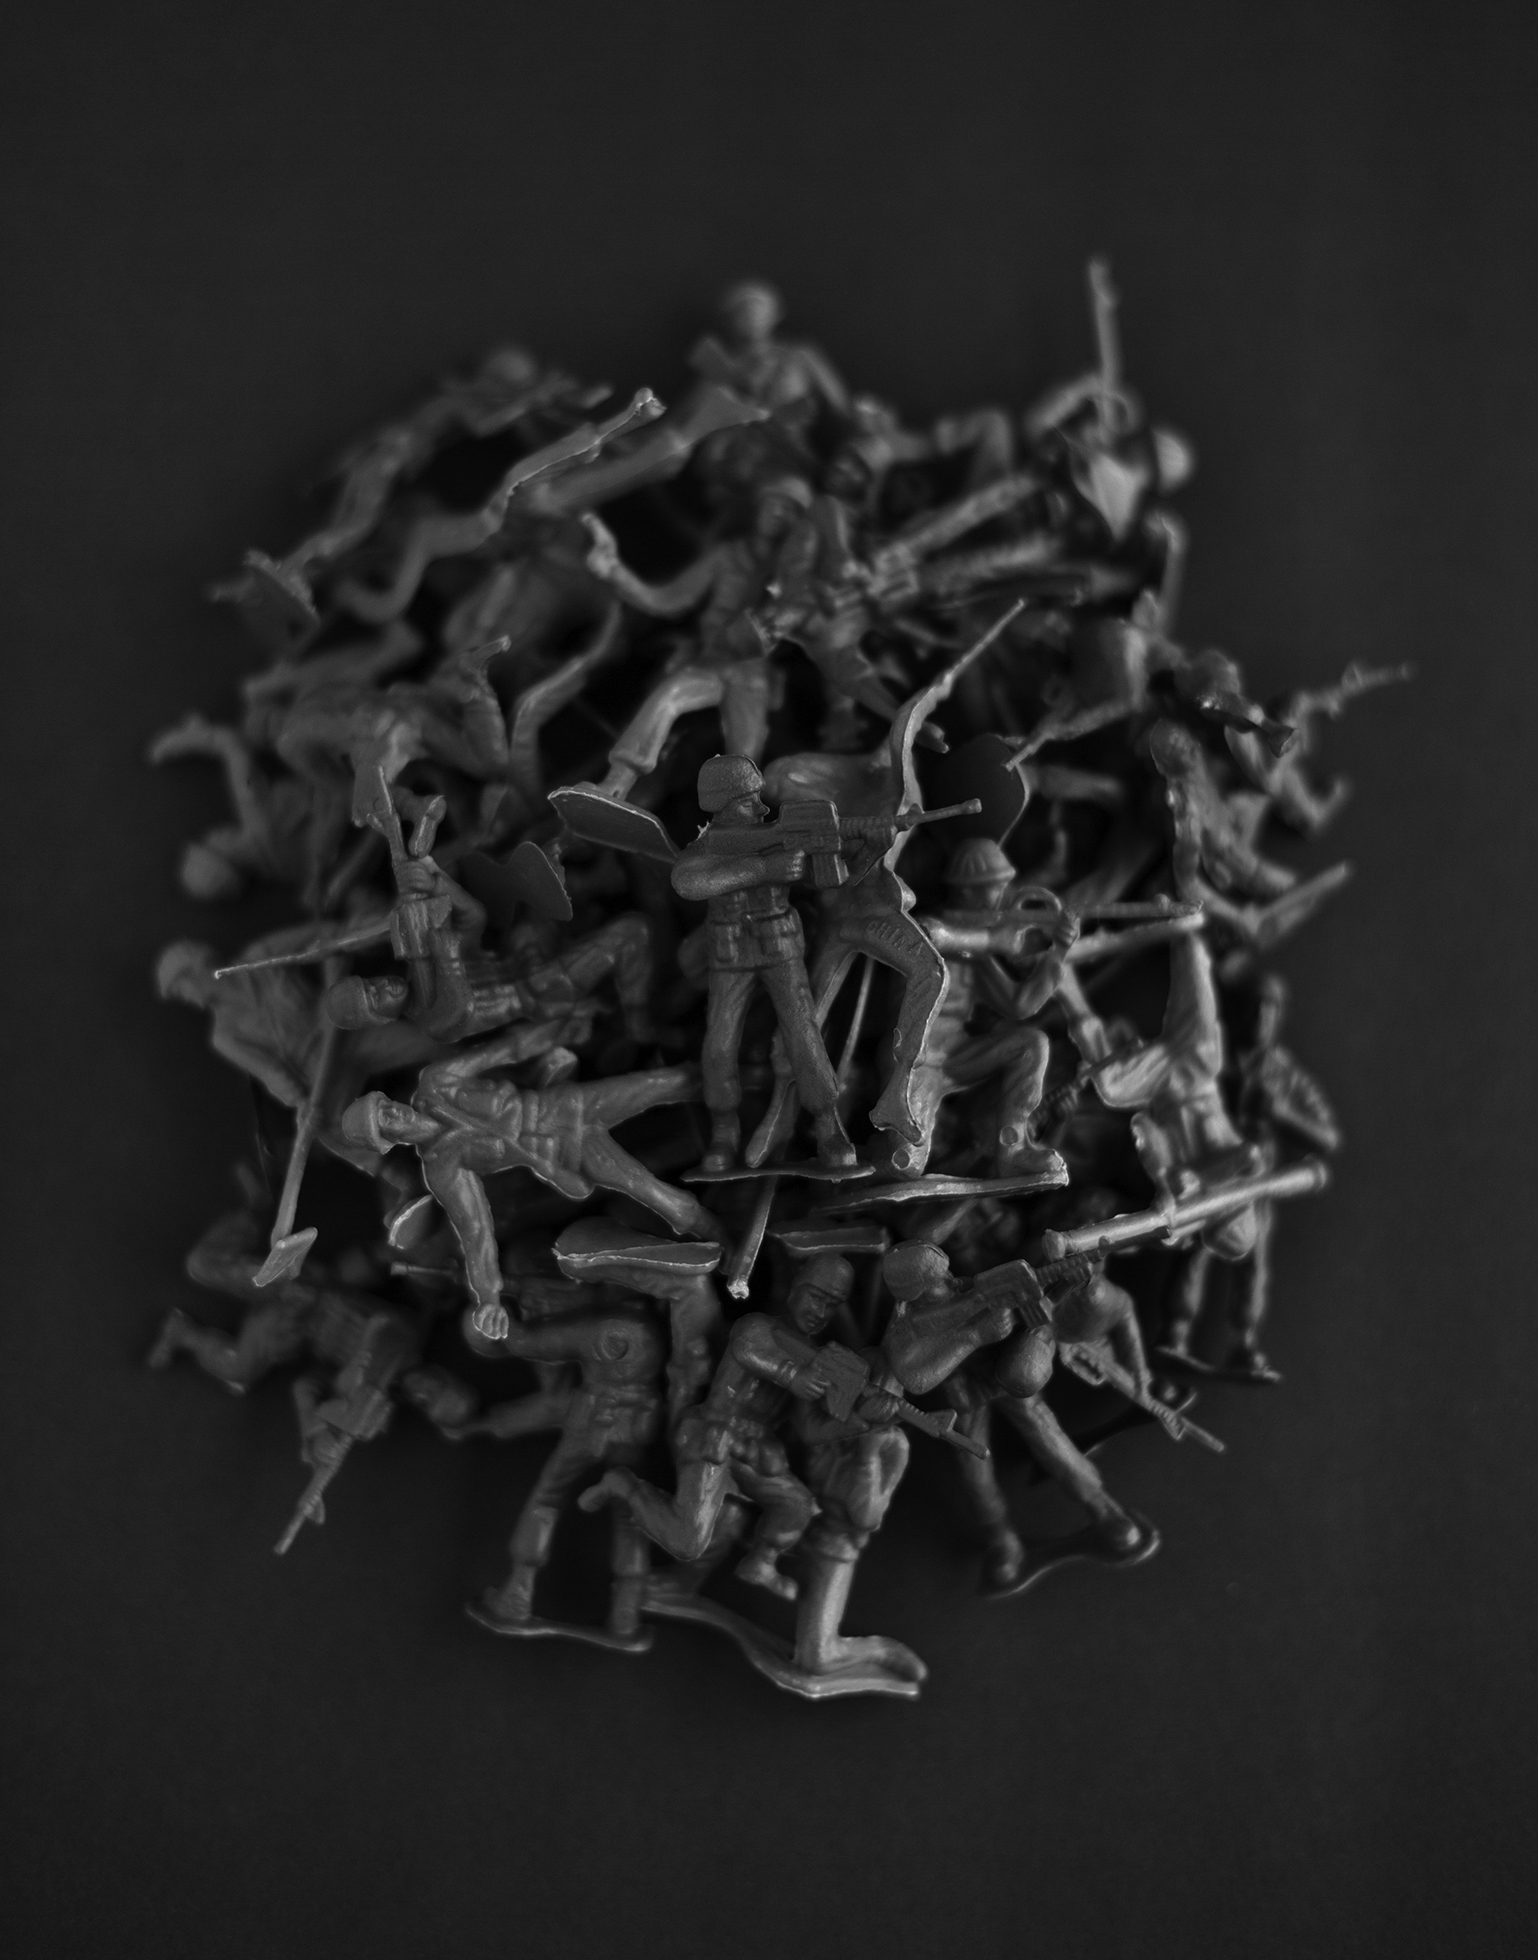 A close-up of a pile of tiny Army toy soldiers.